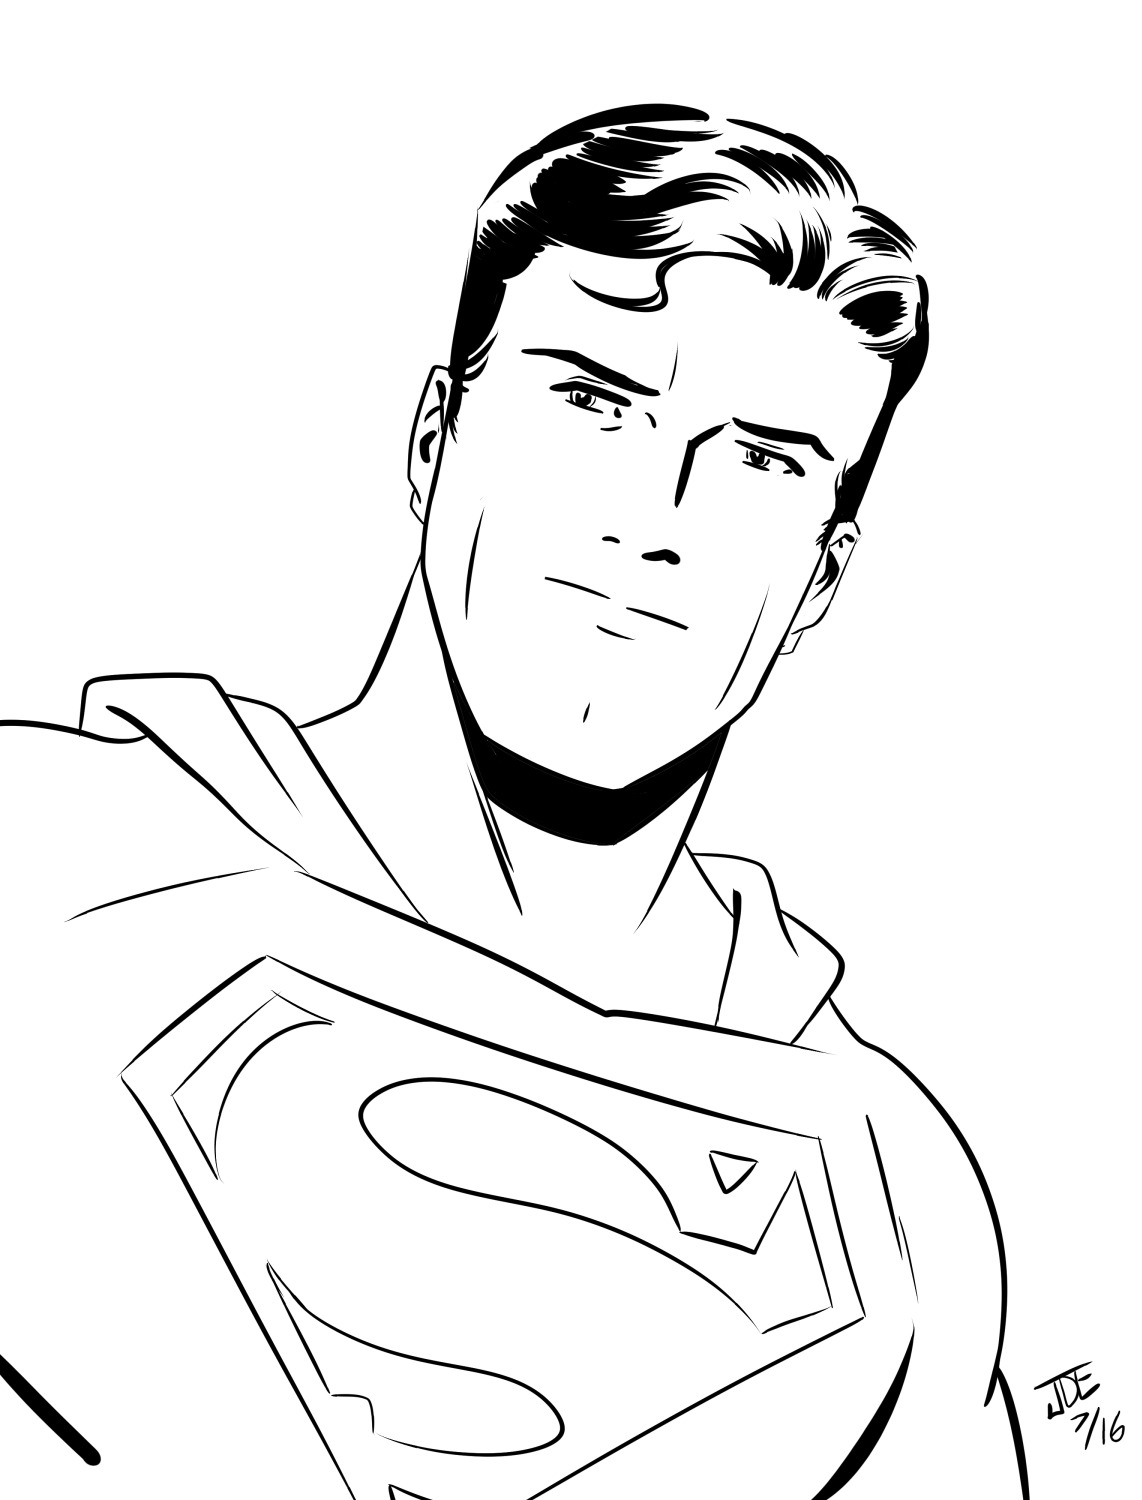 Drawing of Superman’s Face